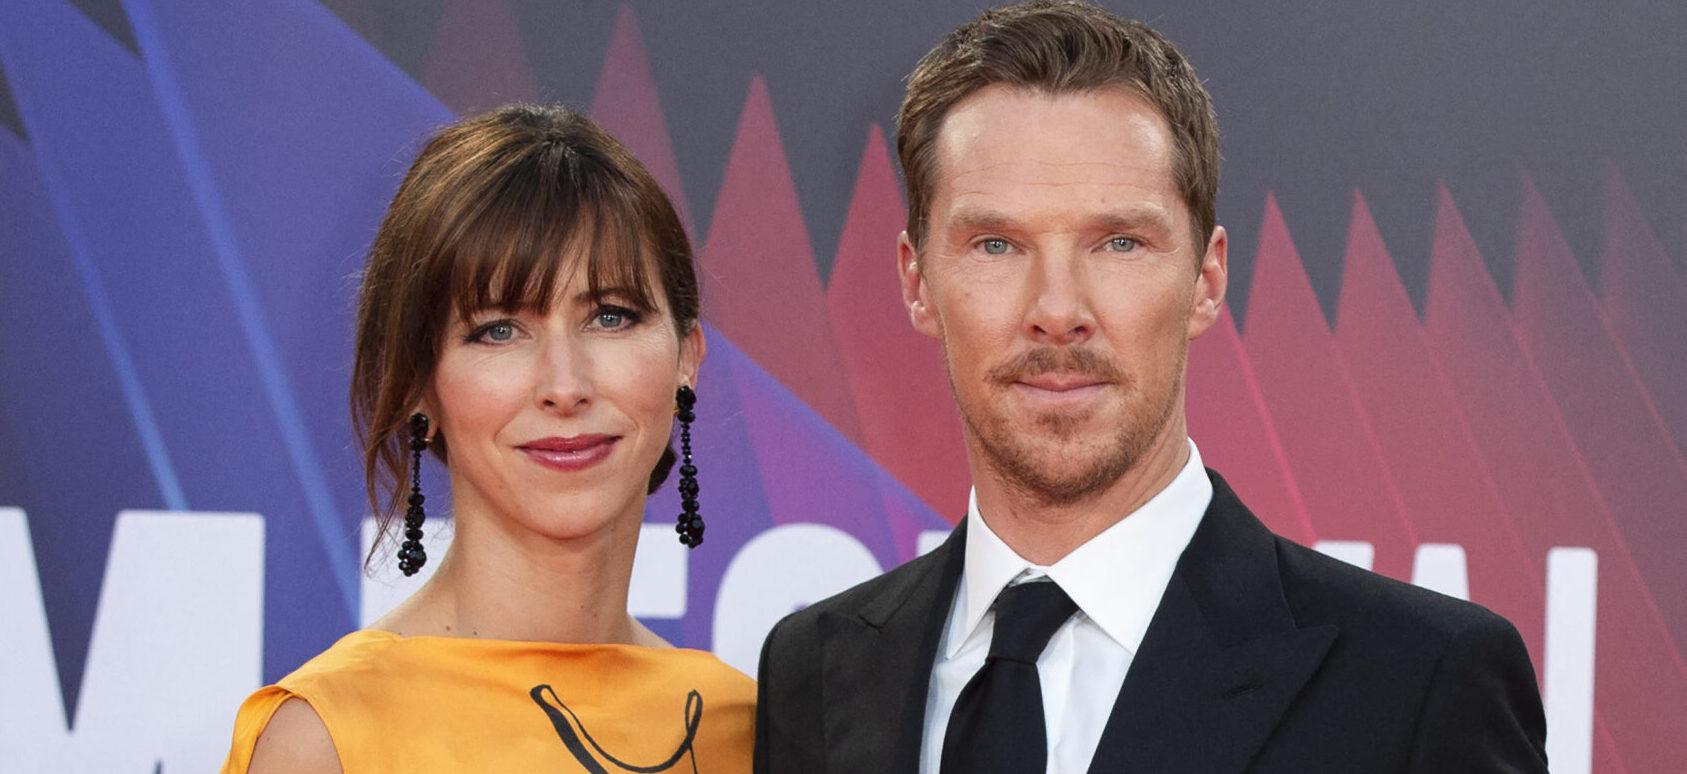 Sophie Hunter and Benedict Cumberbatch at The Power of the Dog Film Premiere